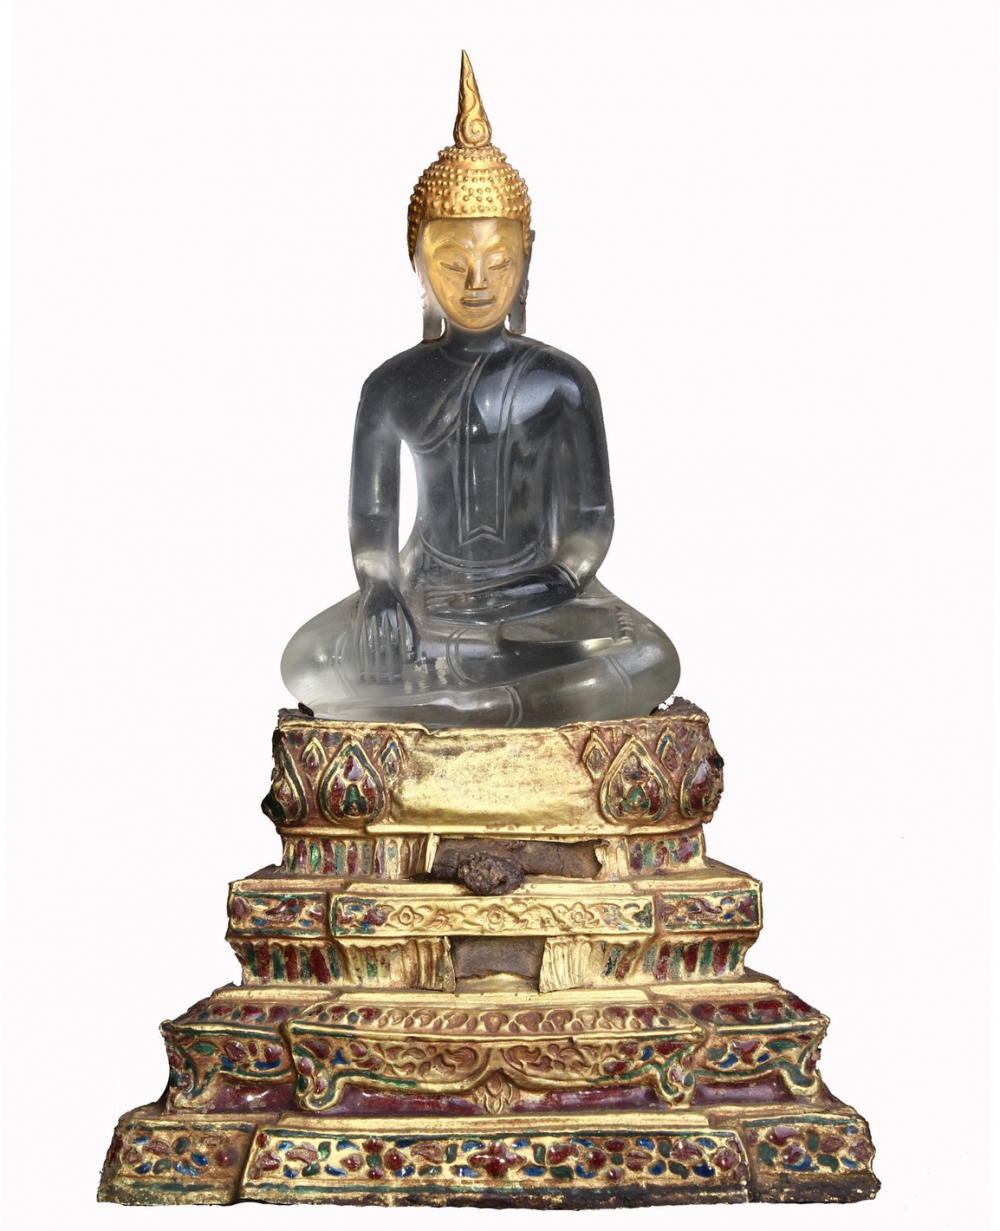 new-year-blessing-planned-for-buddha-artefacts-the-nation-1.jpg